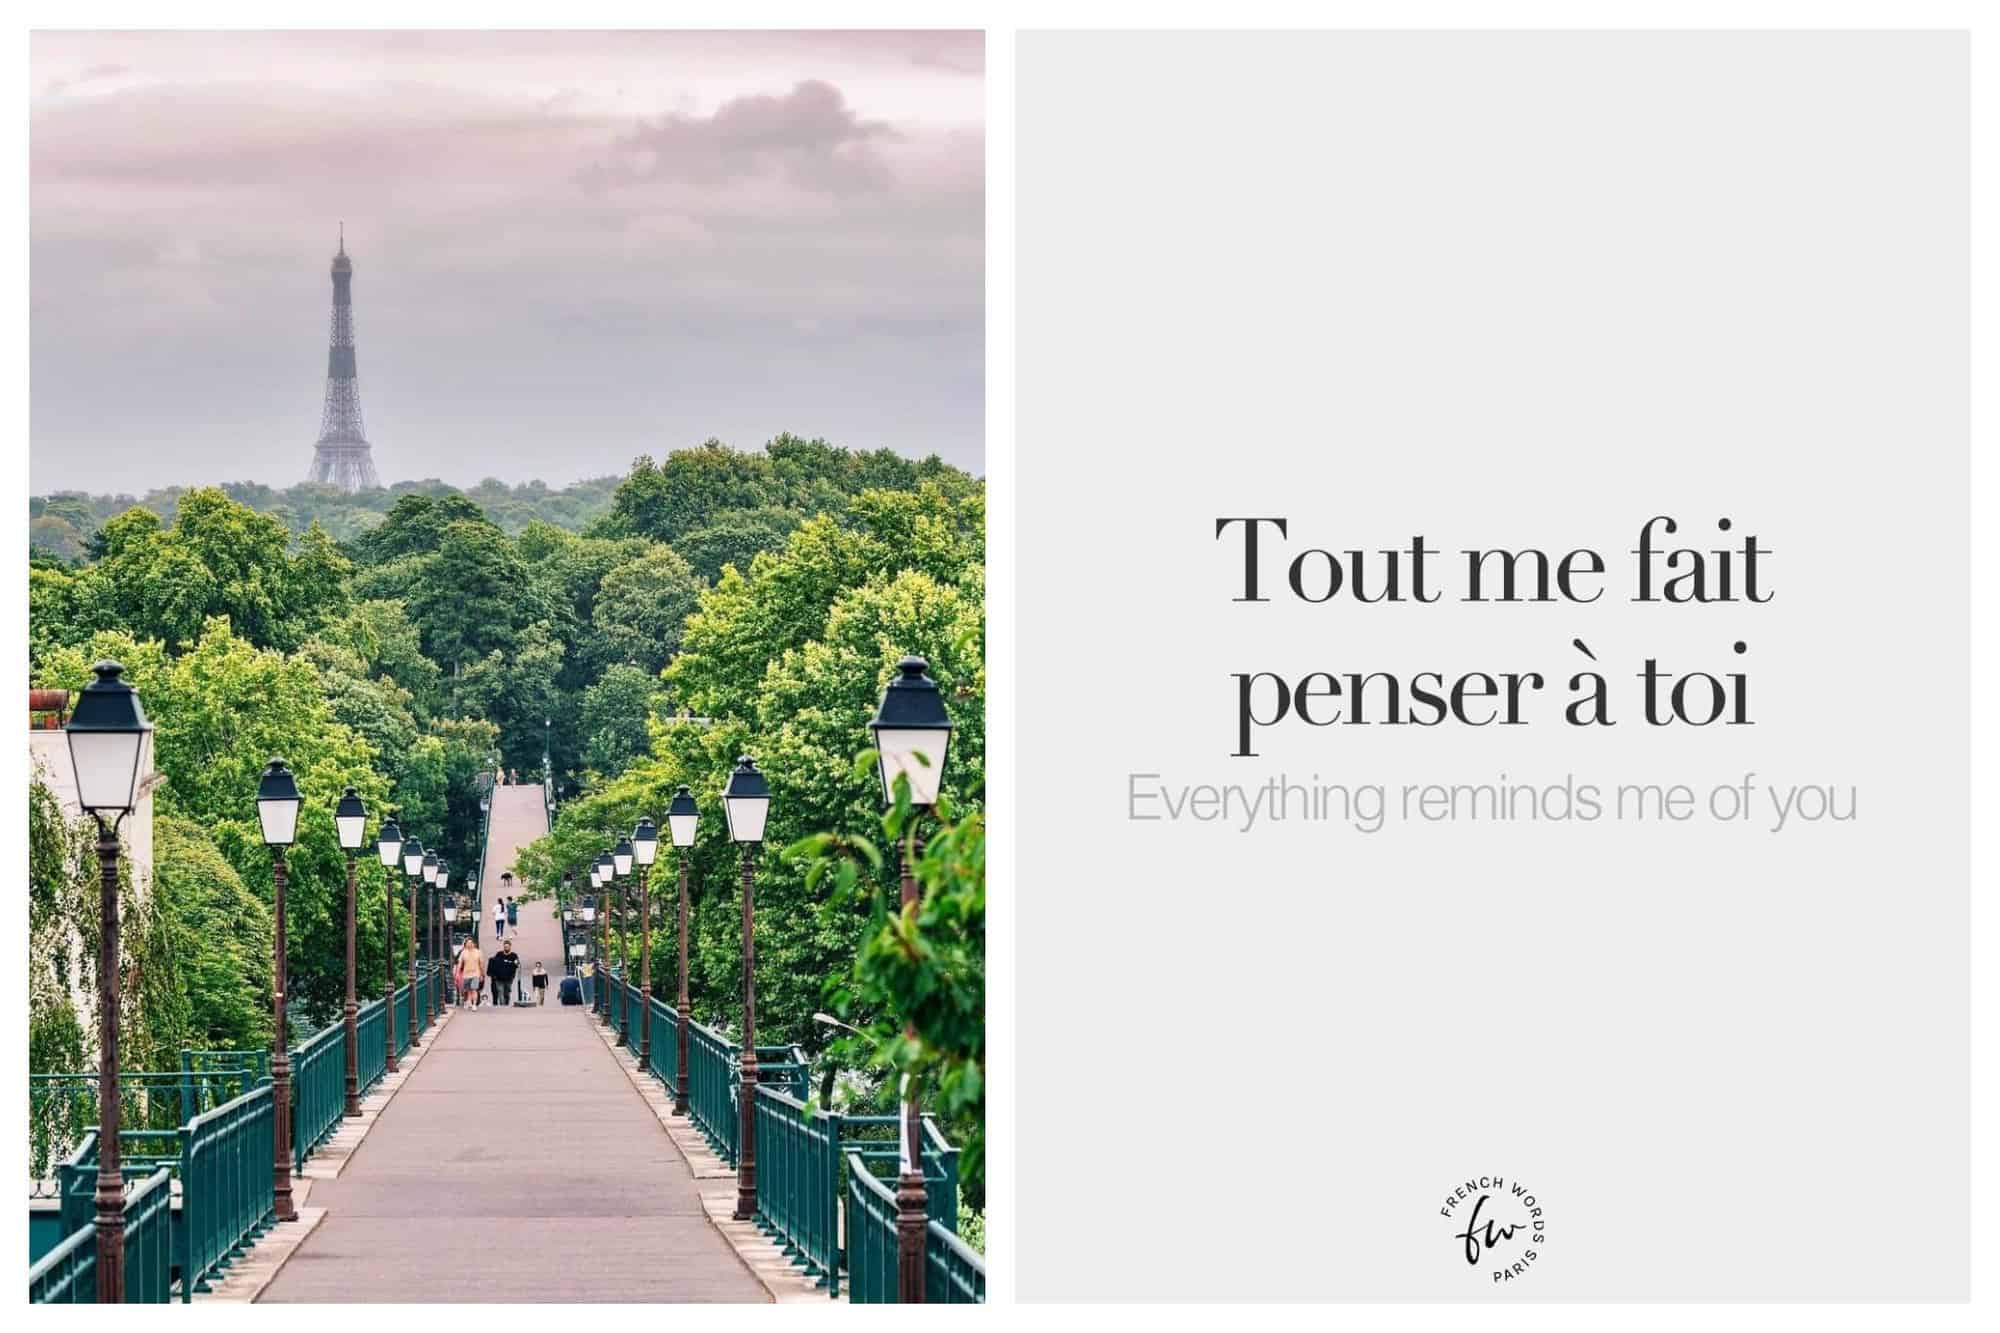 left: a picture of a bridge in Paris with green trees surrounding. The Eiffel Tower can be seen in the background on a cloudy day. Right: text of both french and english: tout me fait penser à toi. Everything reminds me of you.